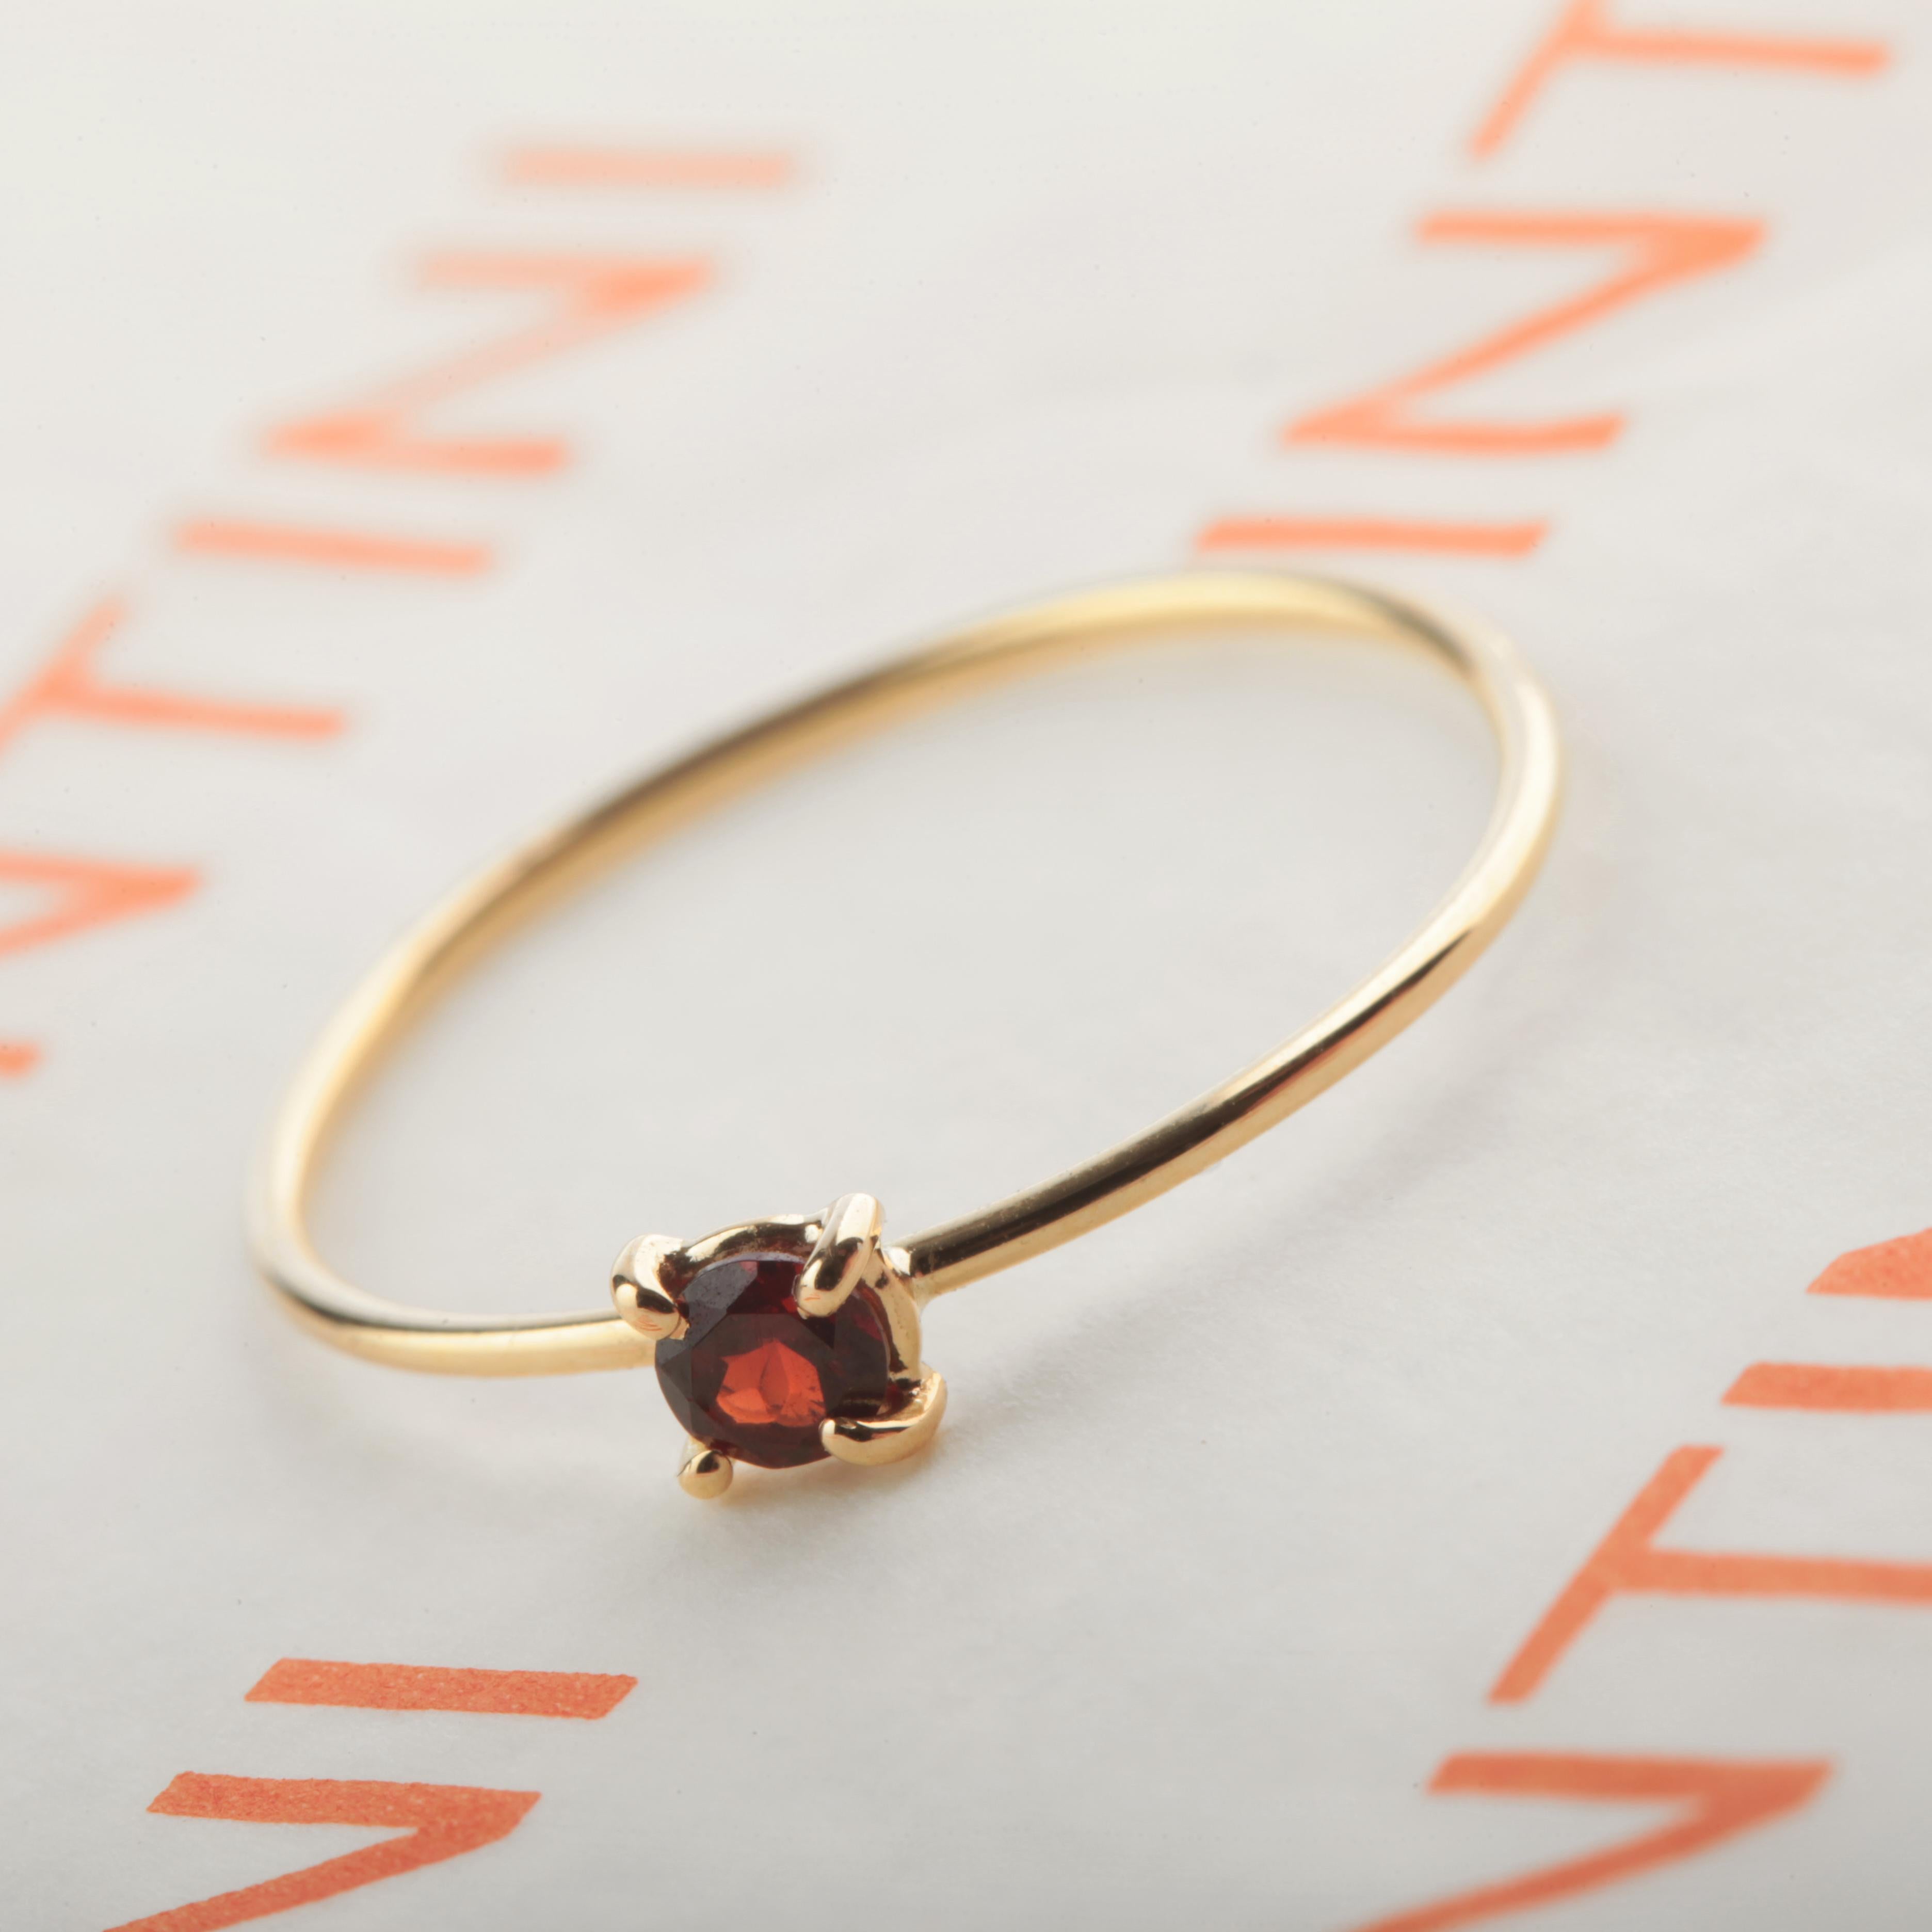 Stunning and magnificent garnet ring with 18 karat yellow gold. This epic jewellery piece is an outstanding display of quality and Italian handmade royal craftsmanship. Create a fashionable look full of light and desire. This ring will embellished